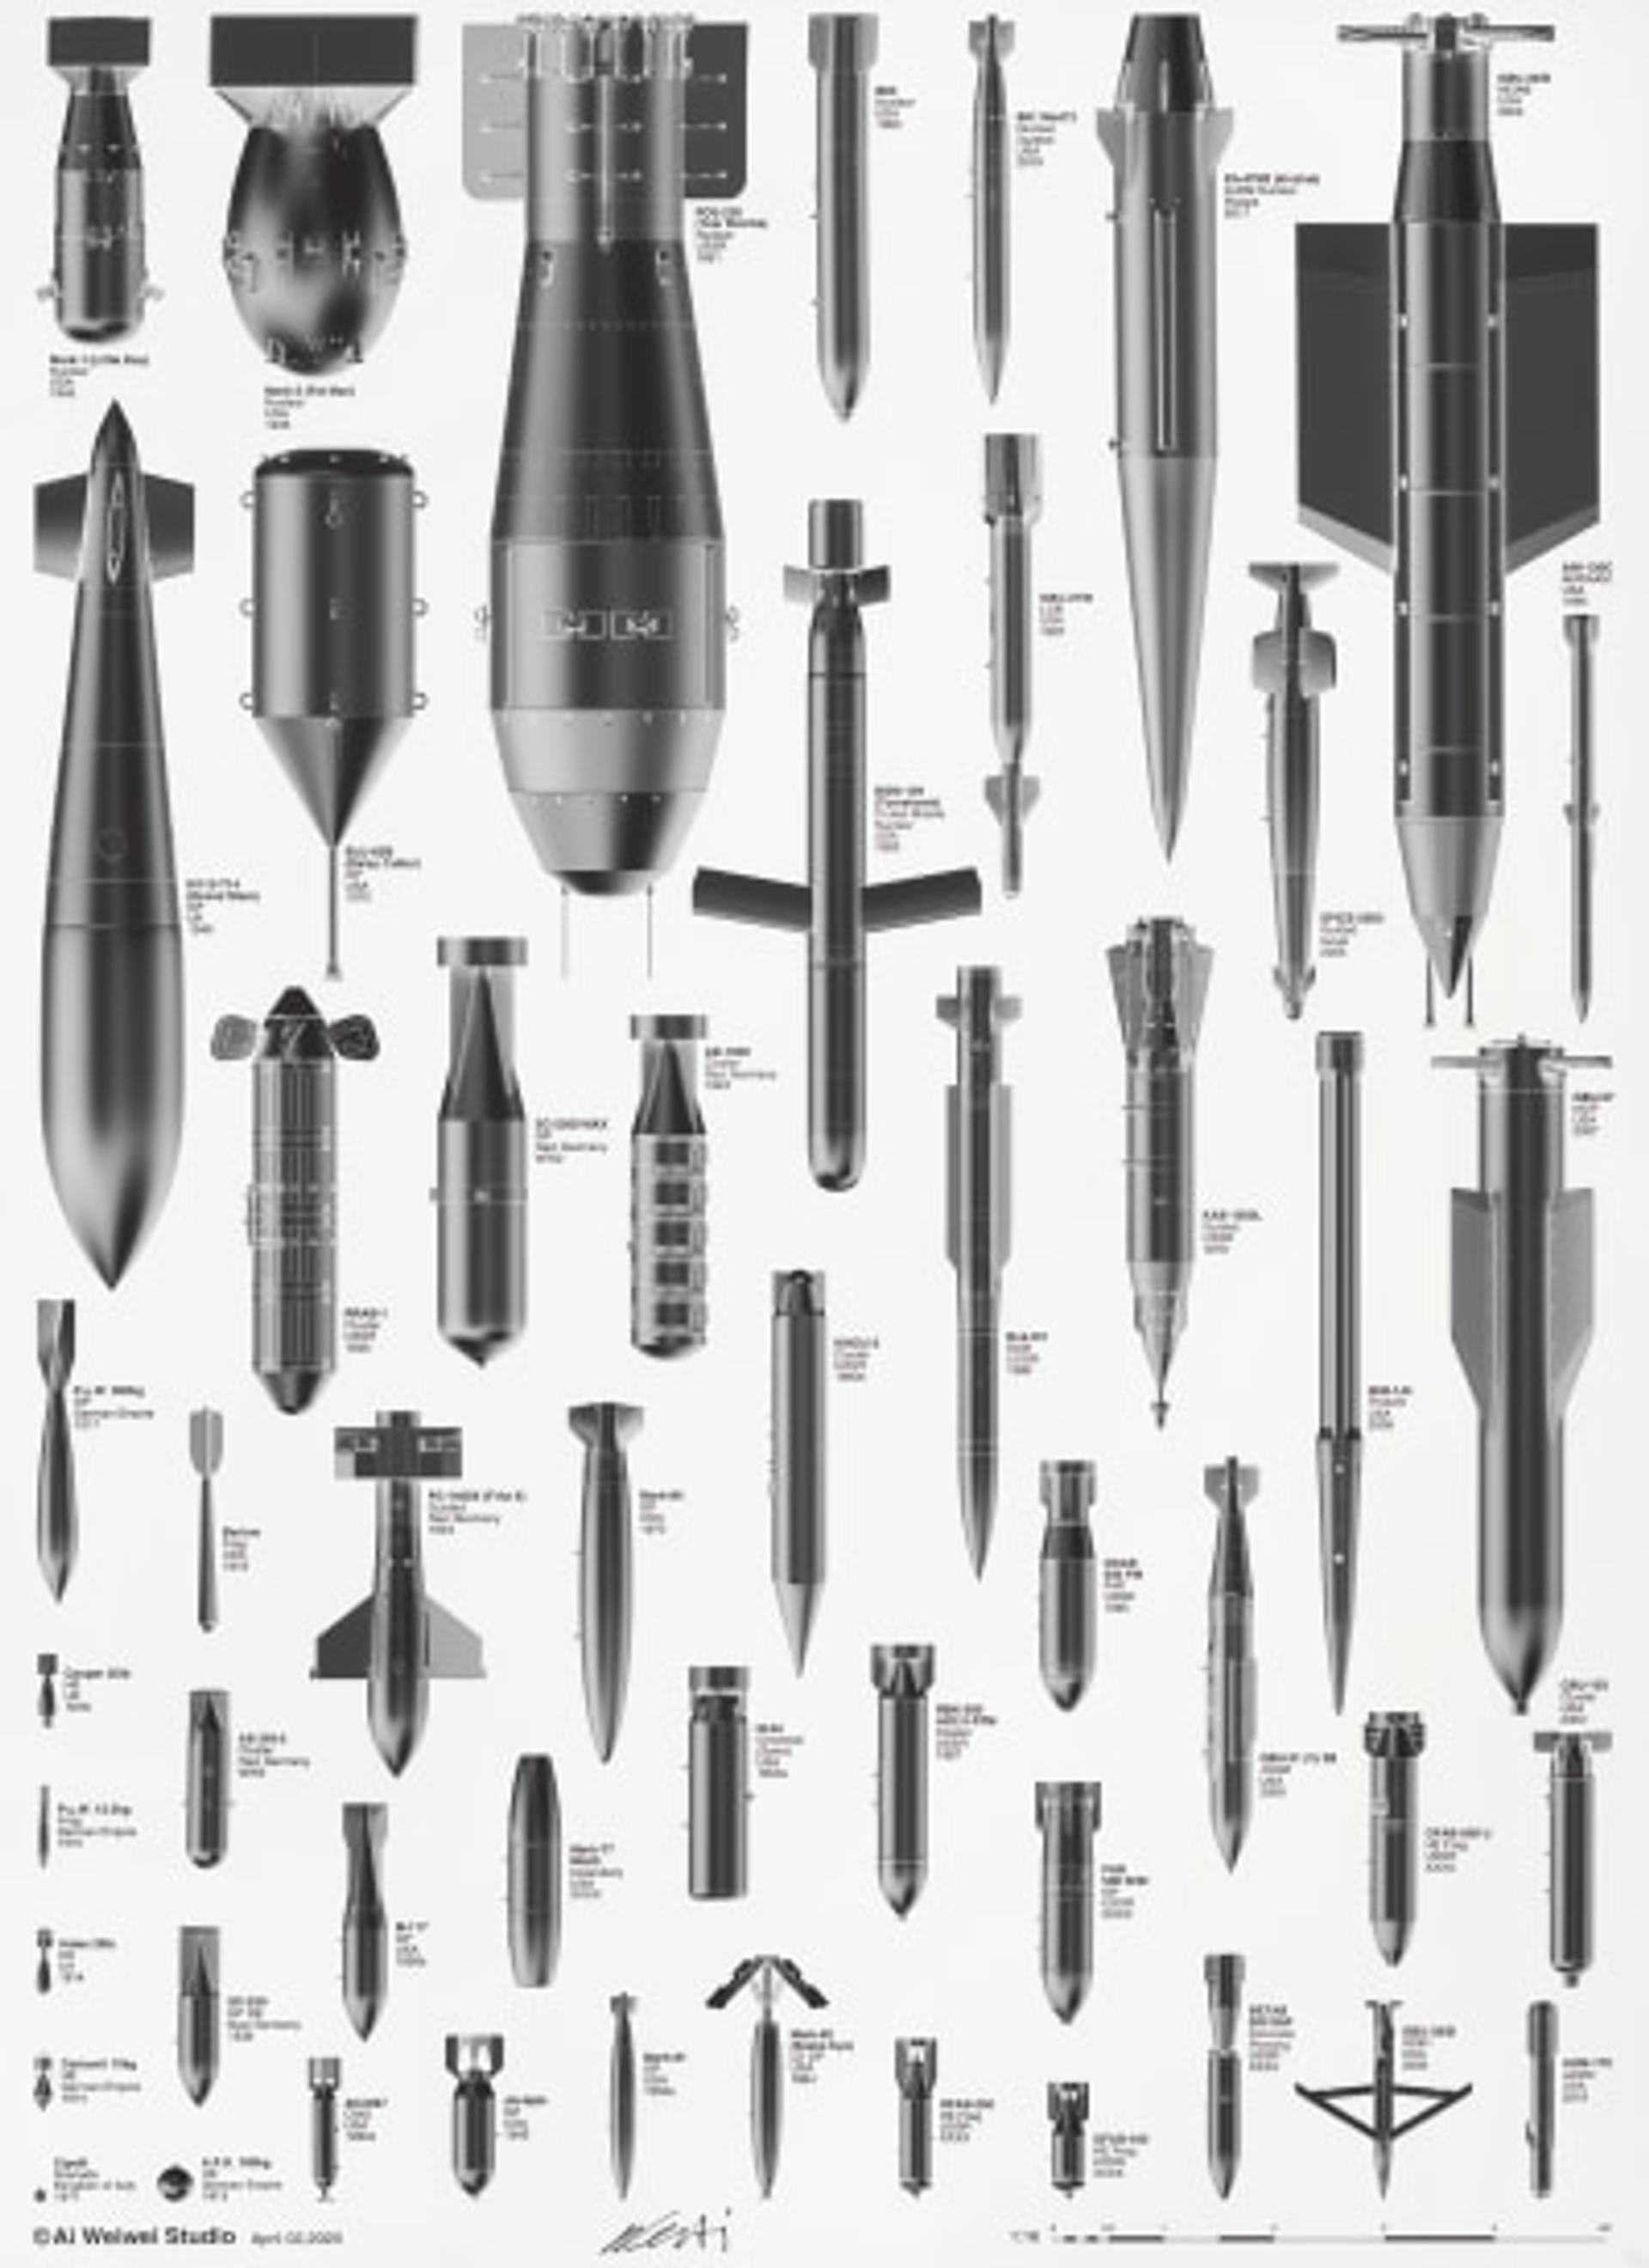 Several bombs of various sizes in black and white print